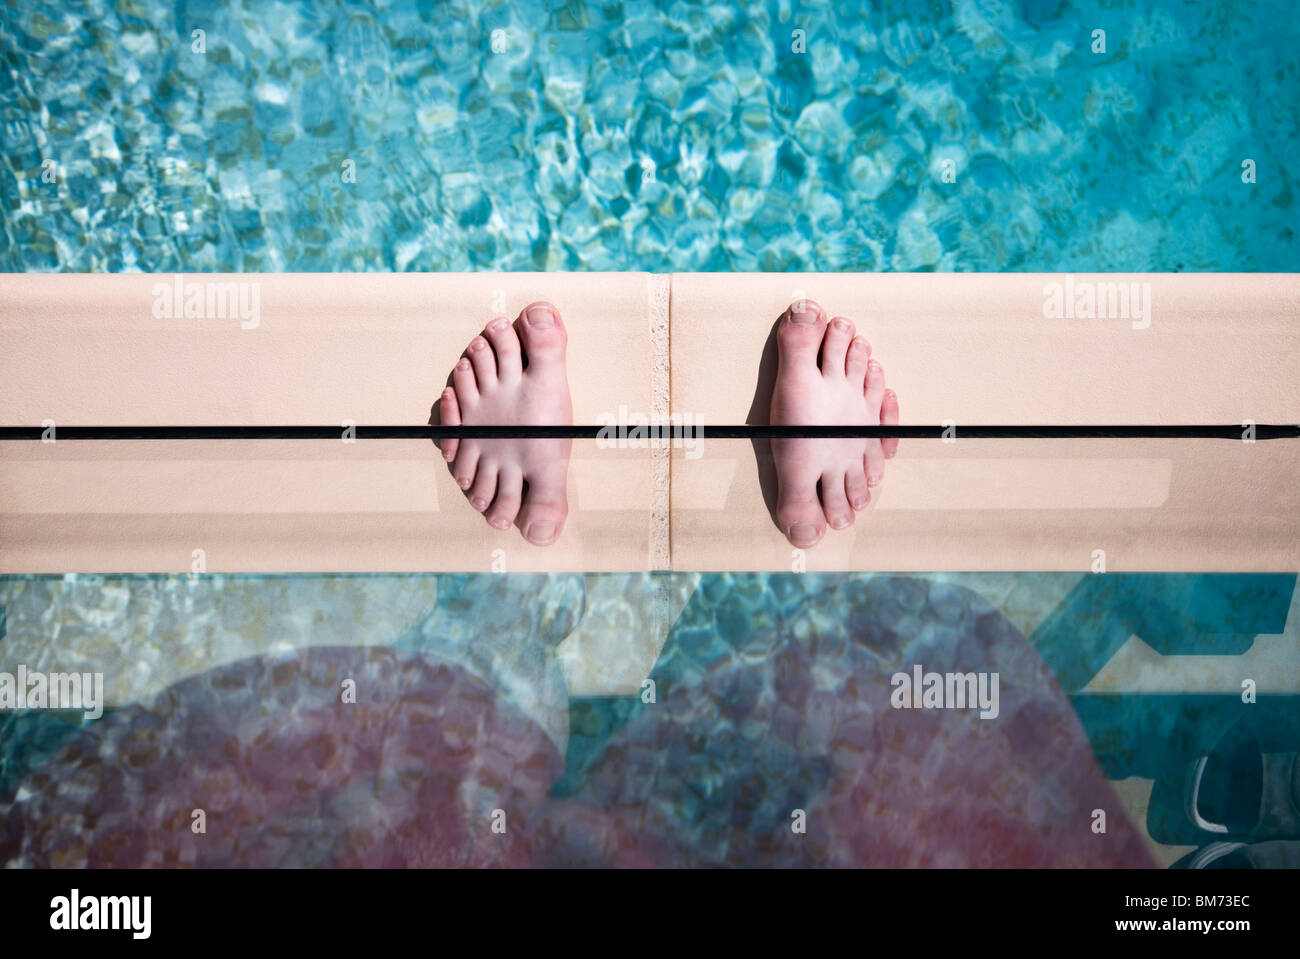 someones feet on the edge of a swimming pool against glass with a reflection making twin feet Stock Photo